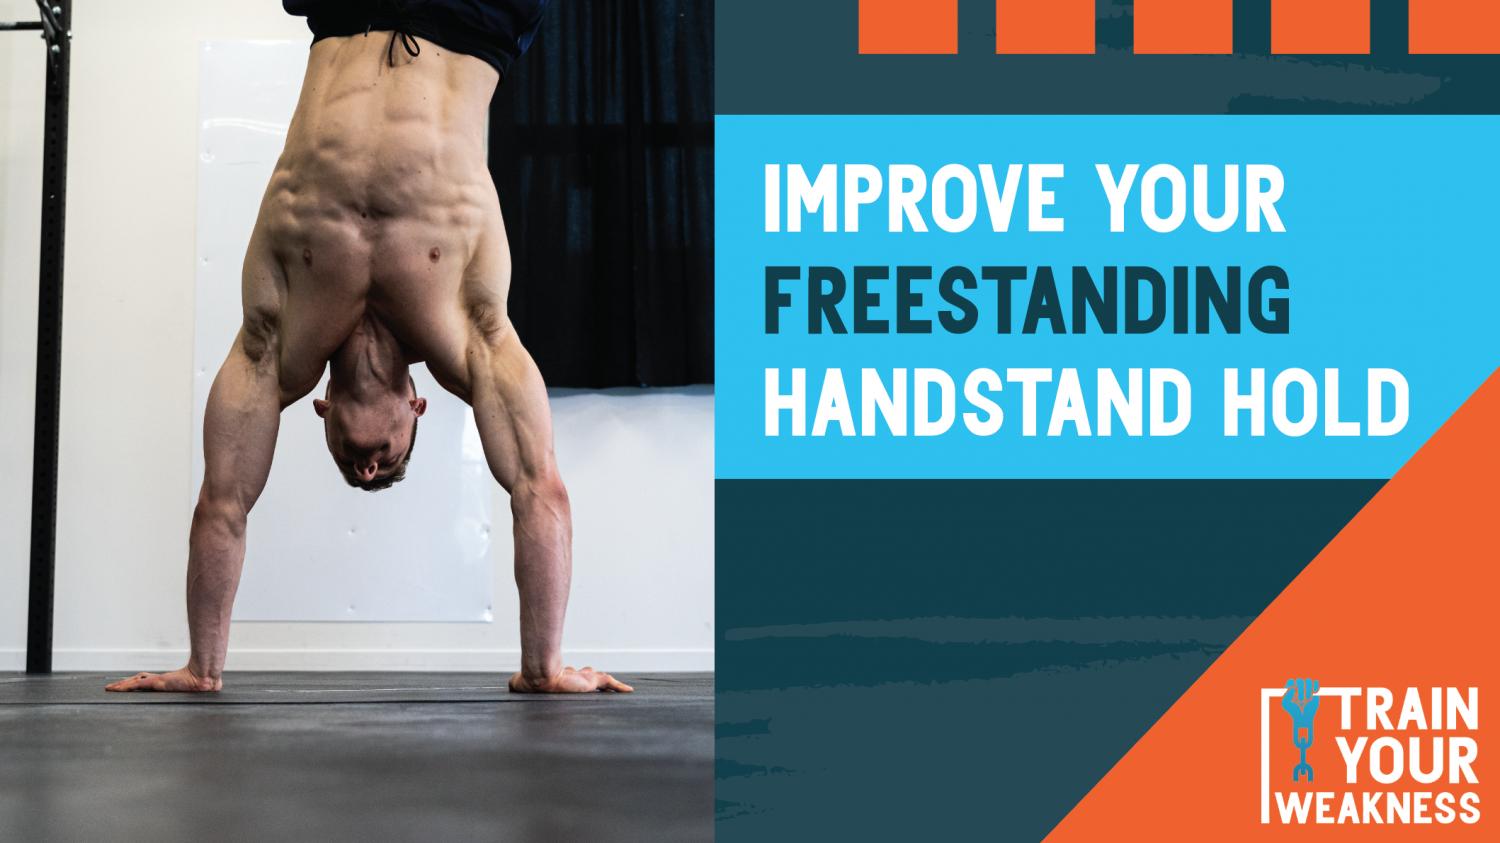 Improve Your Freestanding Handstand Hold